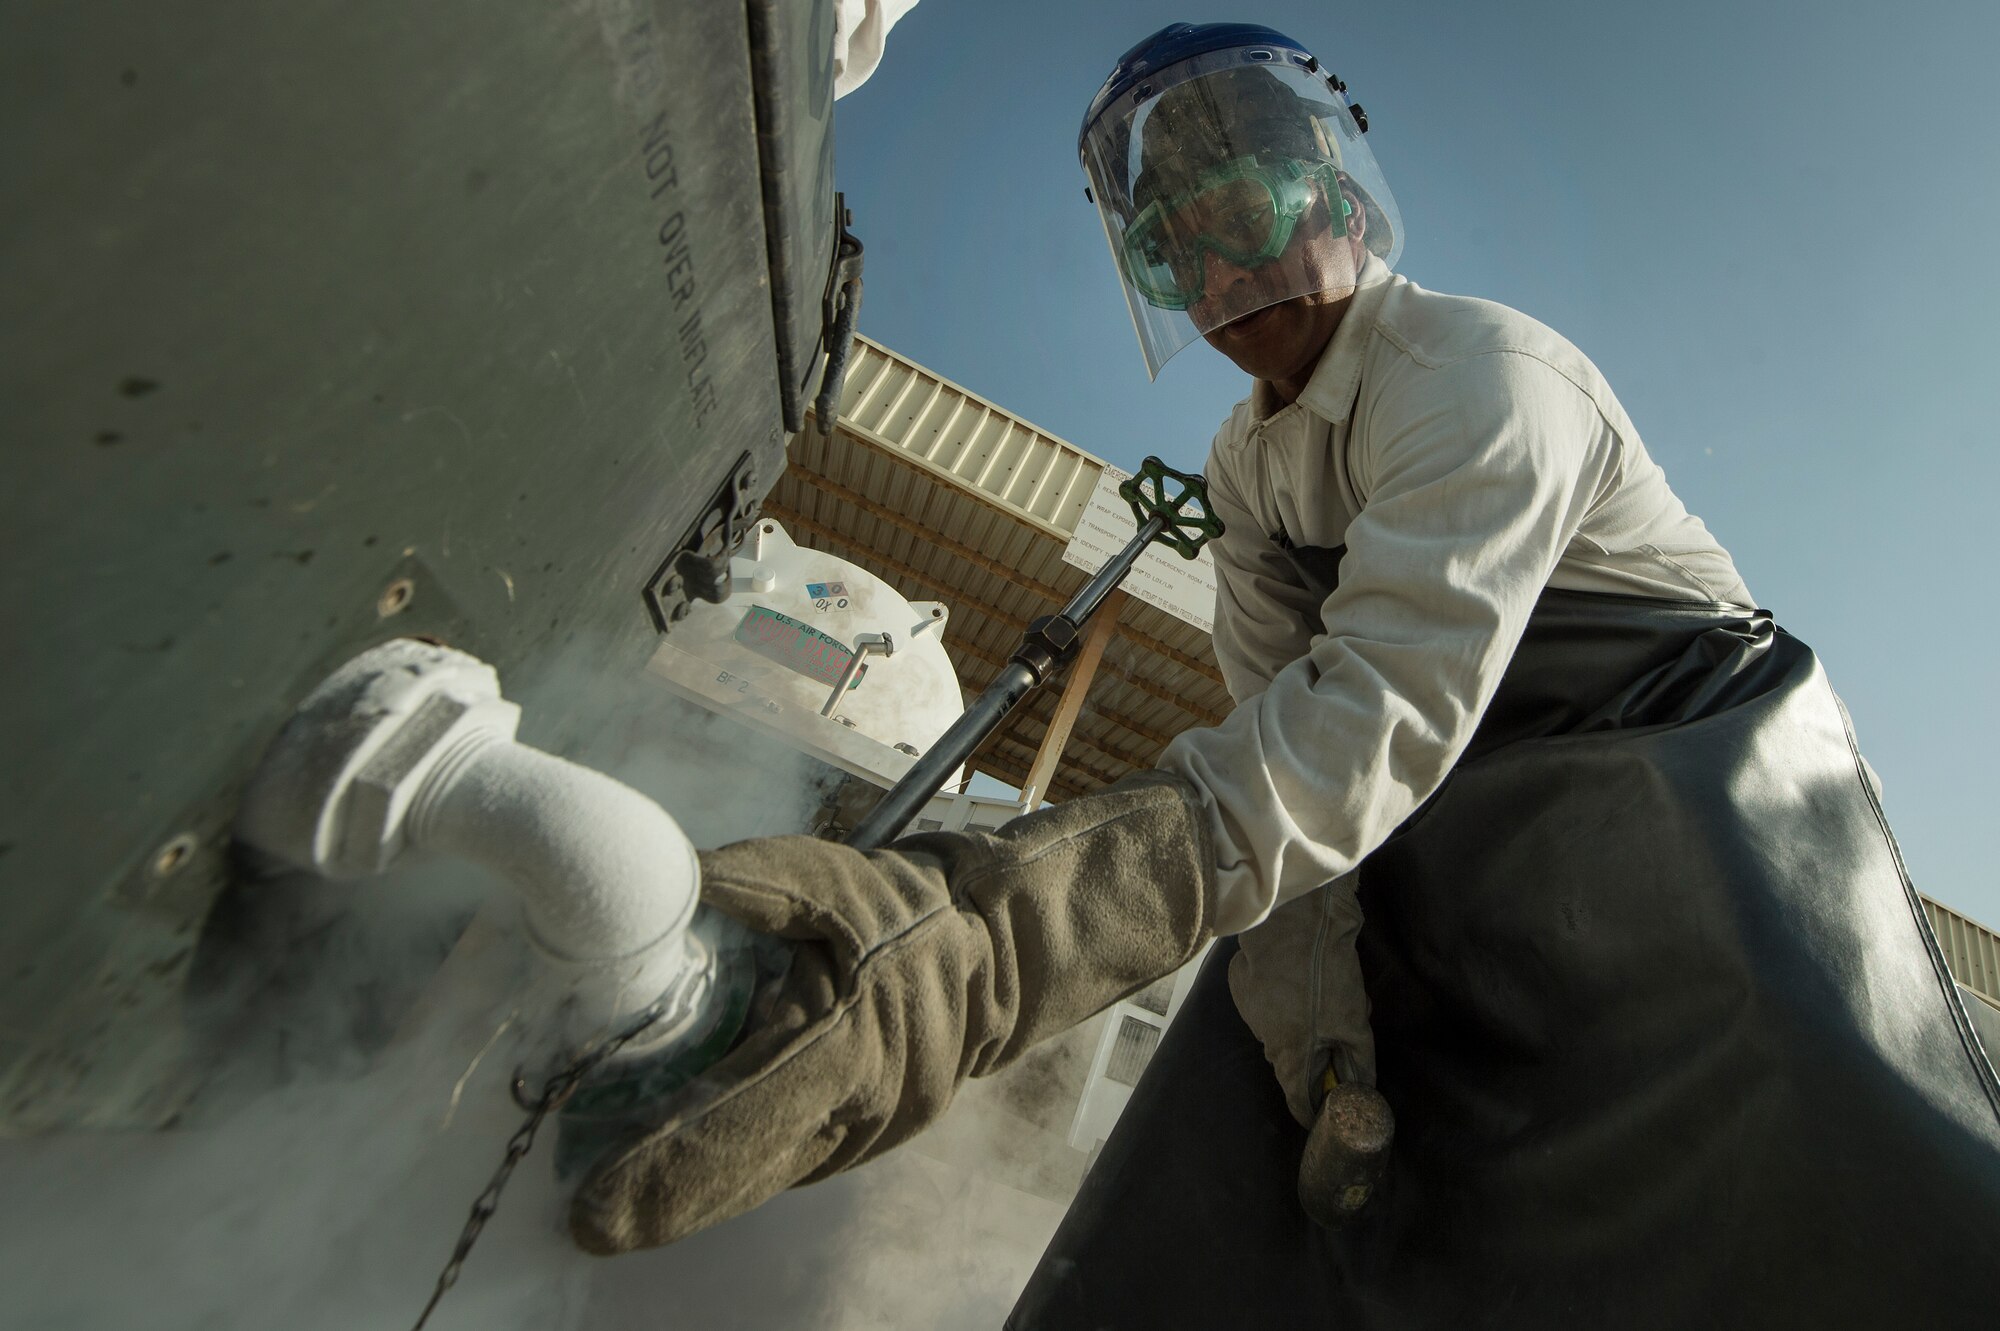 Staff Sgt. Shakir Alikhan, 379th Expeditionary Logistics Readiness Squadron cryogenics section fuels journeyman, prepares to retrieve liquid oxygen for inspection at Al Udeid Air Base, Qatar, April 4, 2019. The cryogenics team here ensures aircrew members across U.S. Air Forces Central Command are equipped with liquid oxygen and nitrogen, supporting flying missions across the region. (U.S. Air Force photo by Tech. Sgt. Christopher Hubenthal)